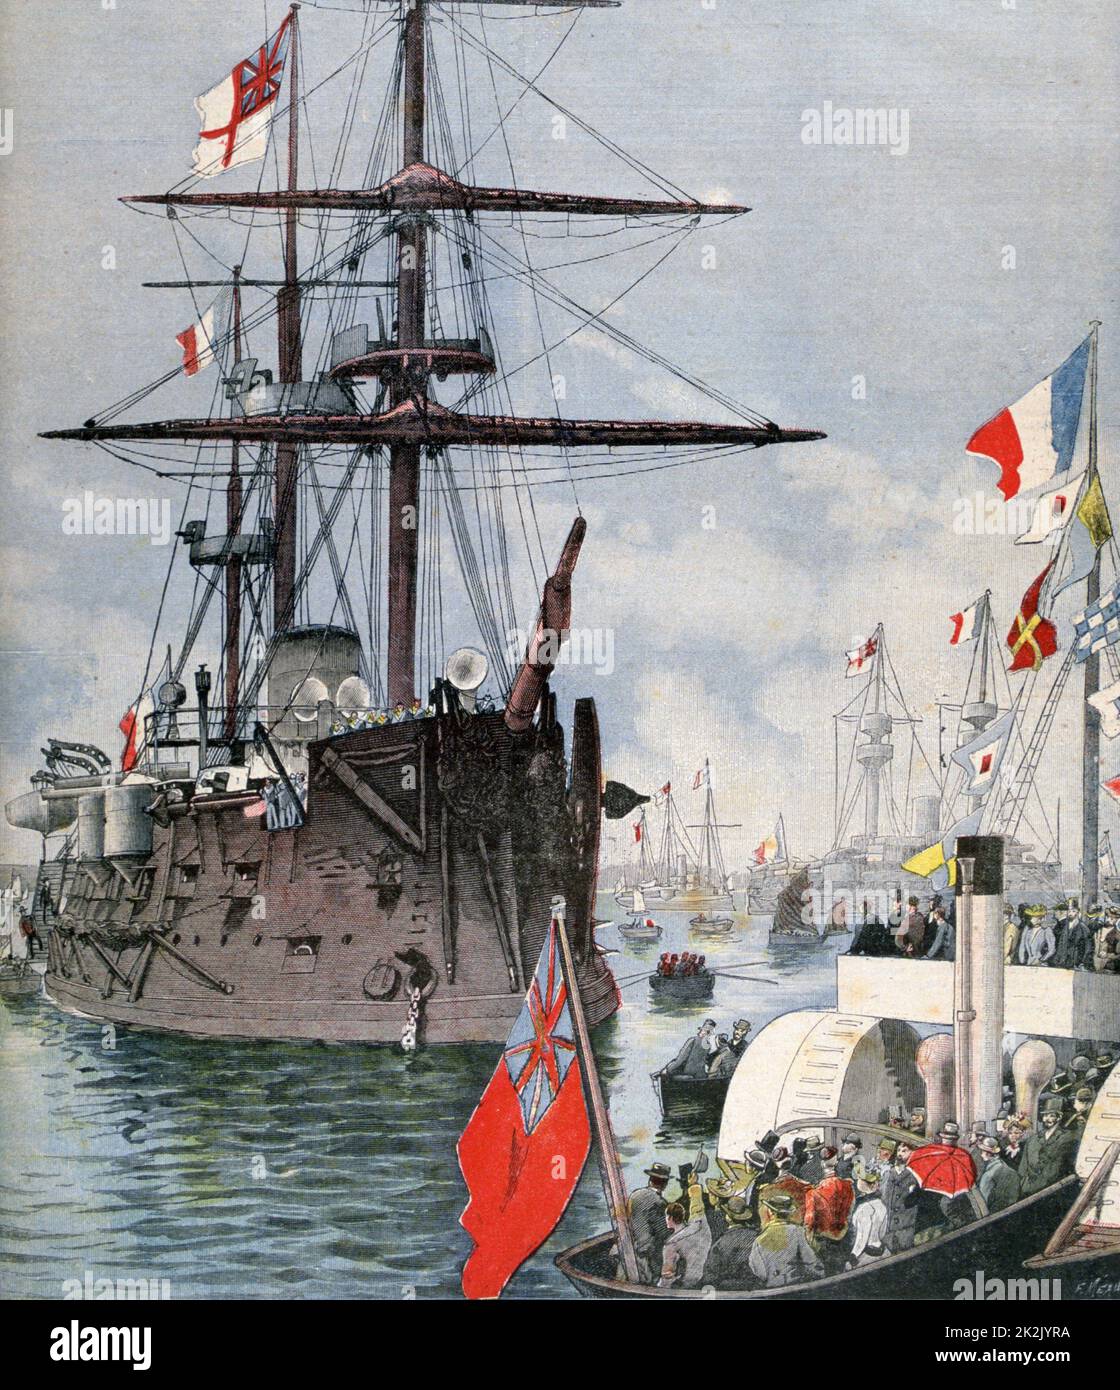 The French fleet visiting Portsmouth, England. The ironclad 'Marengo', the French flagship. From 'Le Petit Journal', Paris, 29 August 1891. France, Navy, Ship Stock Photo